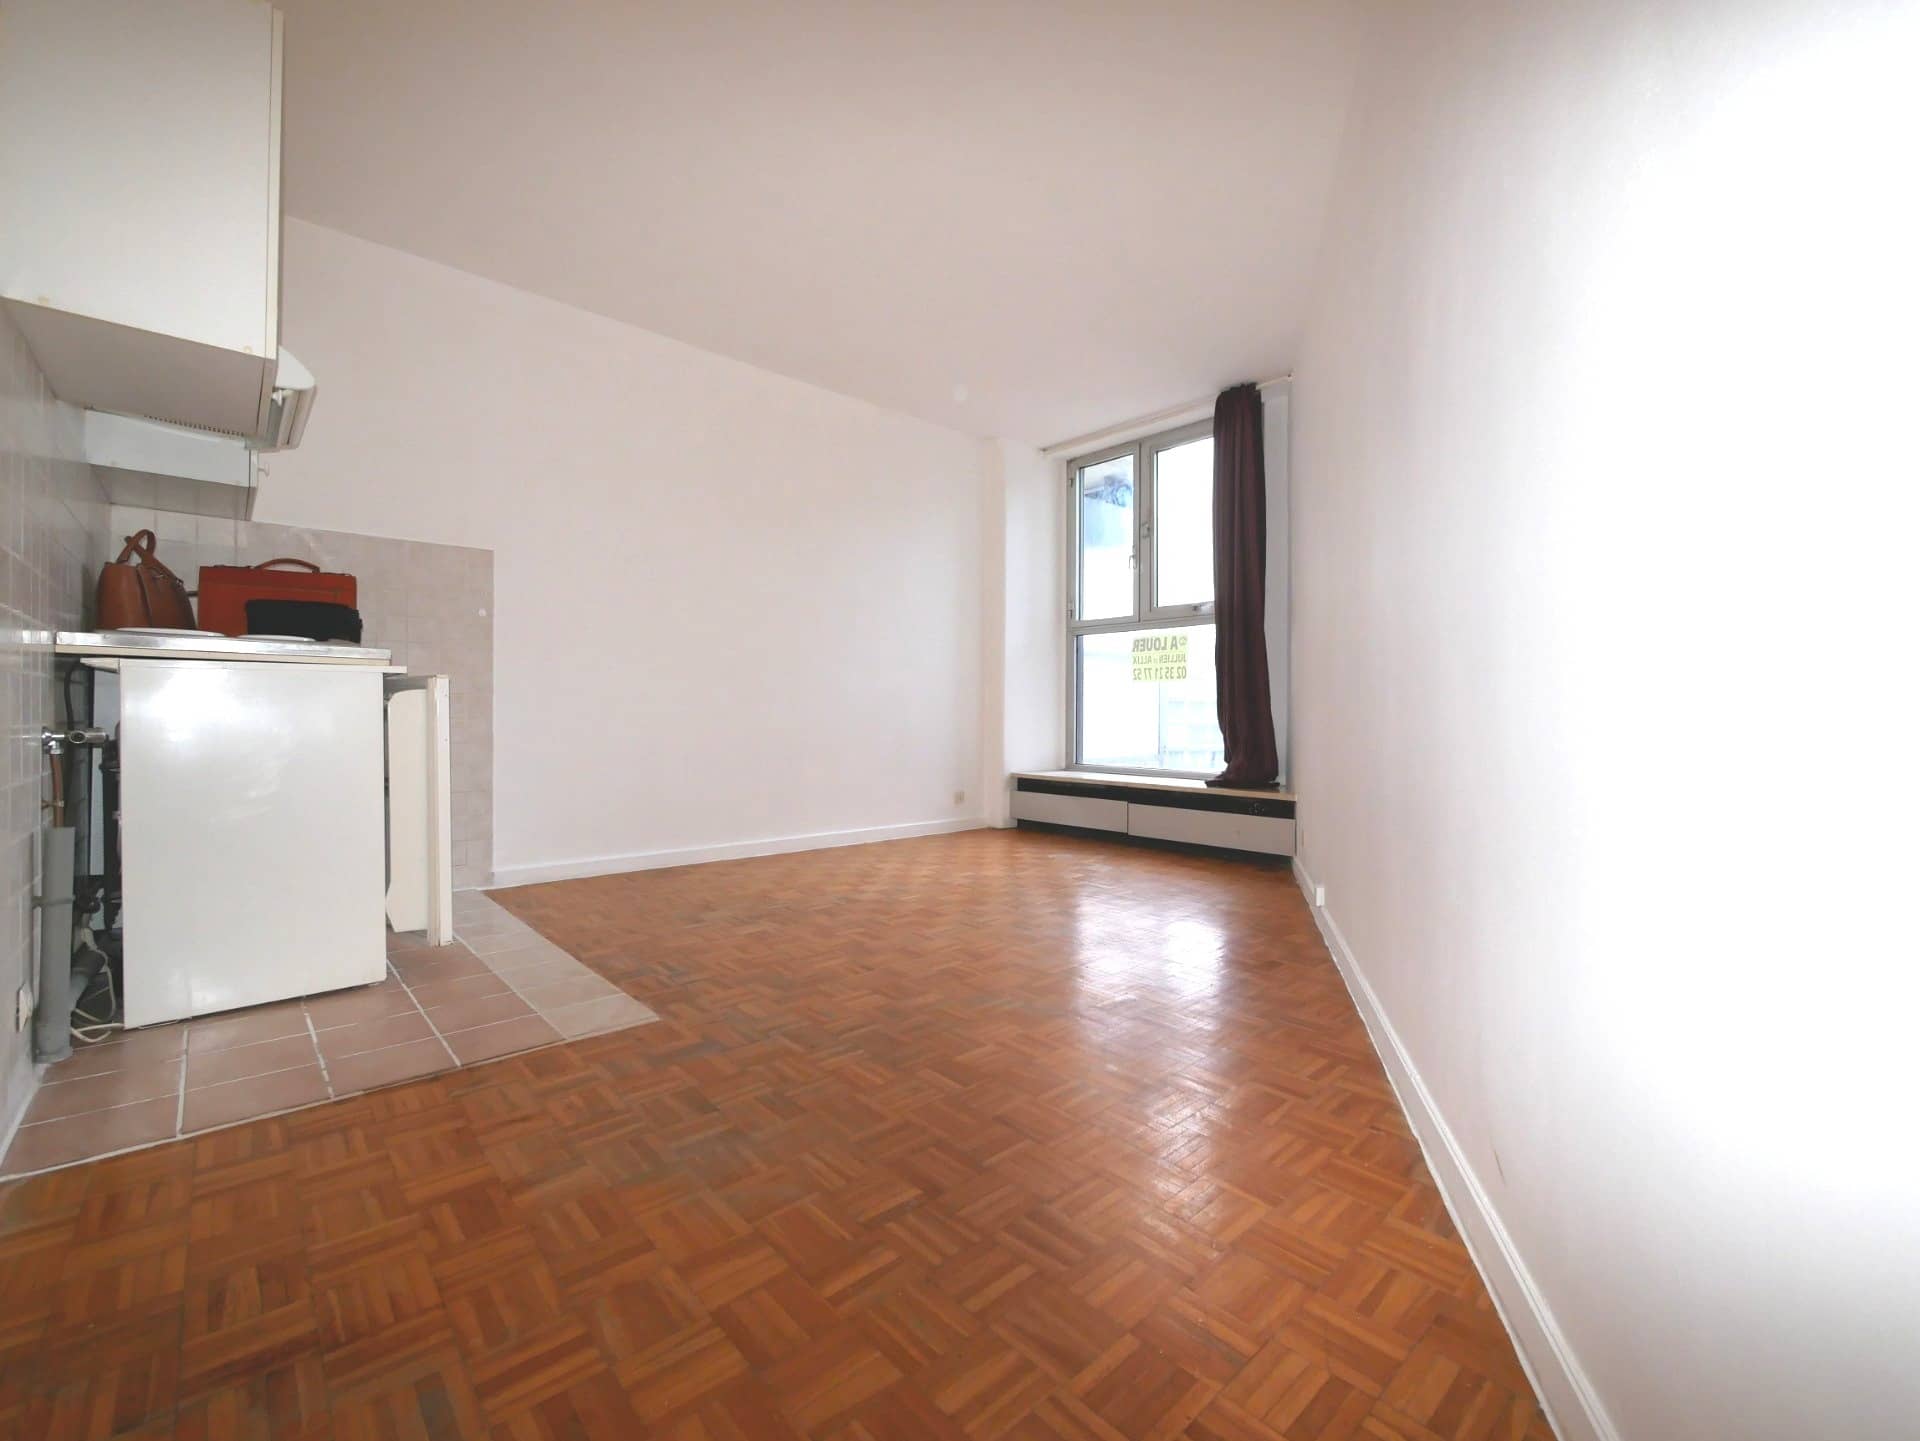 Location Appartement type F1 Le Havre 124-1